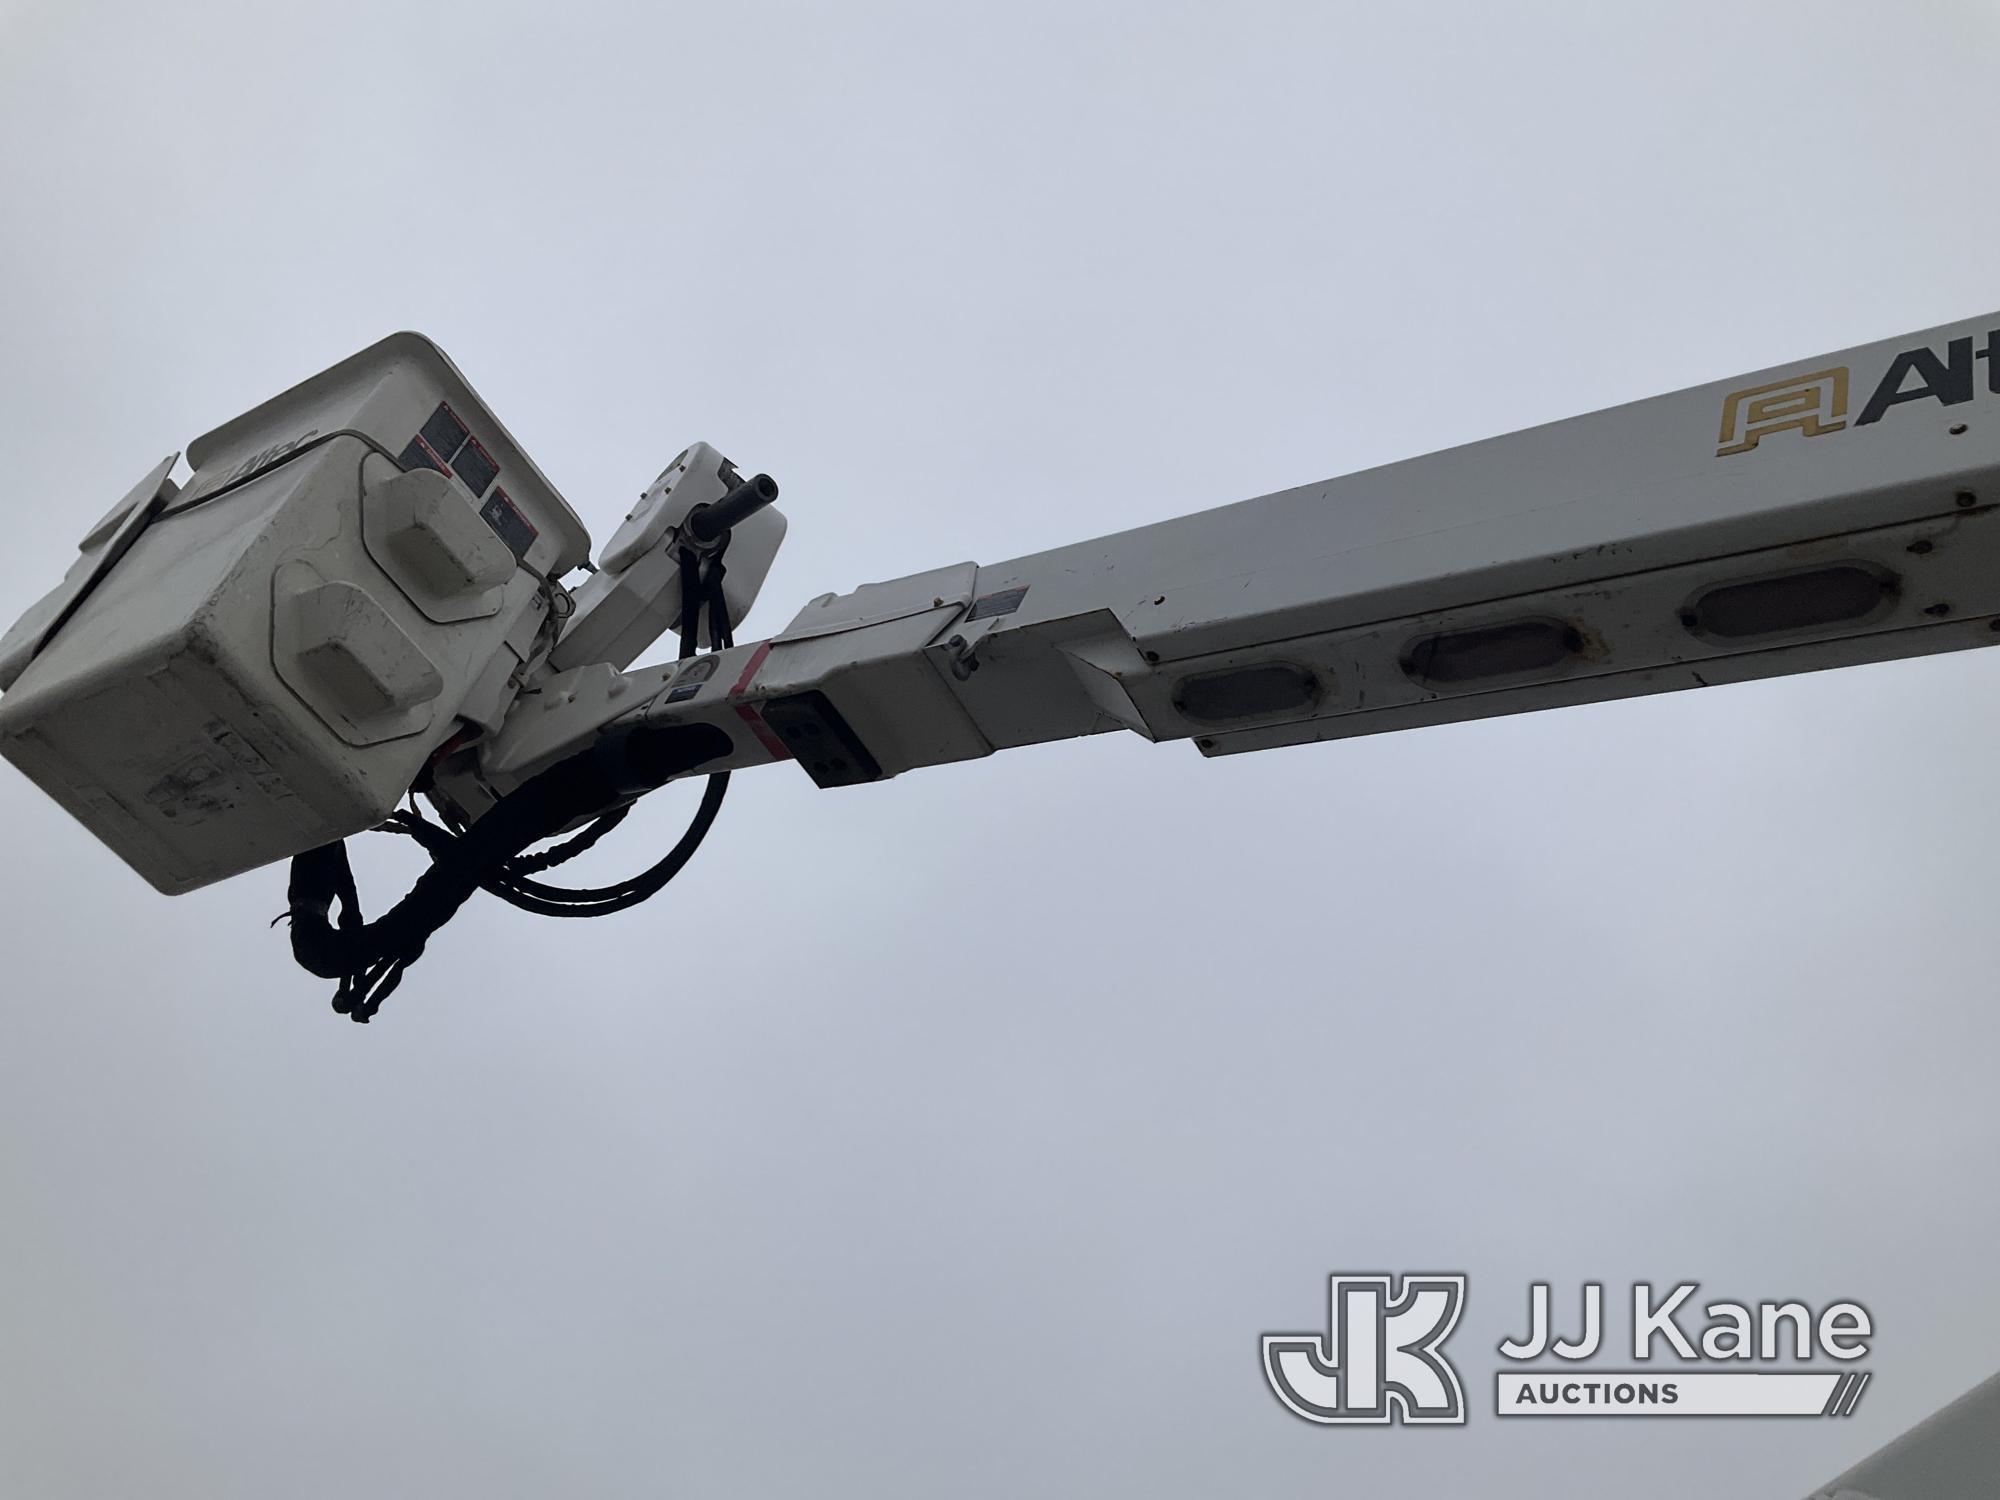 (Kansas City, MO) Altec AT40-MH, Articulating & Telescopic Material Handling Bucket Truck mounted be